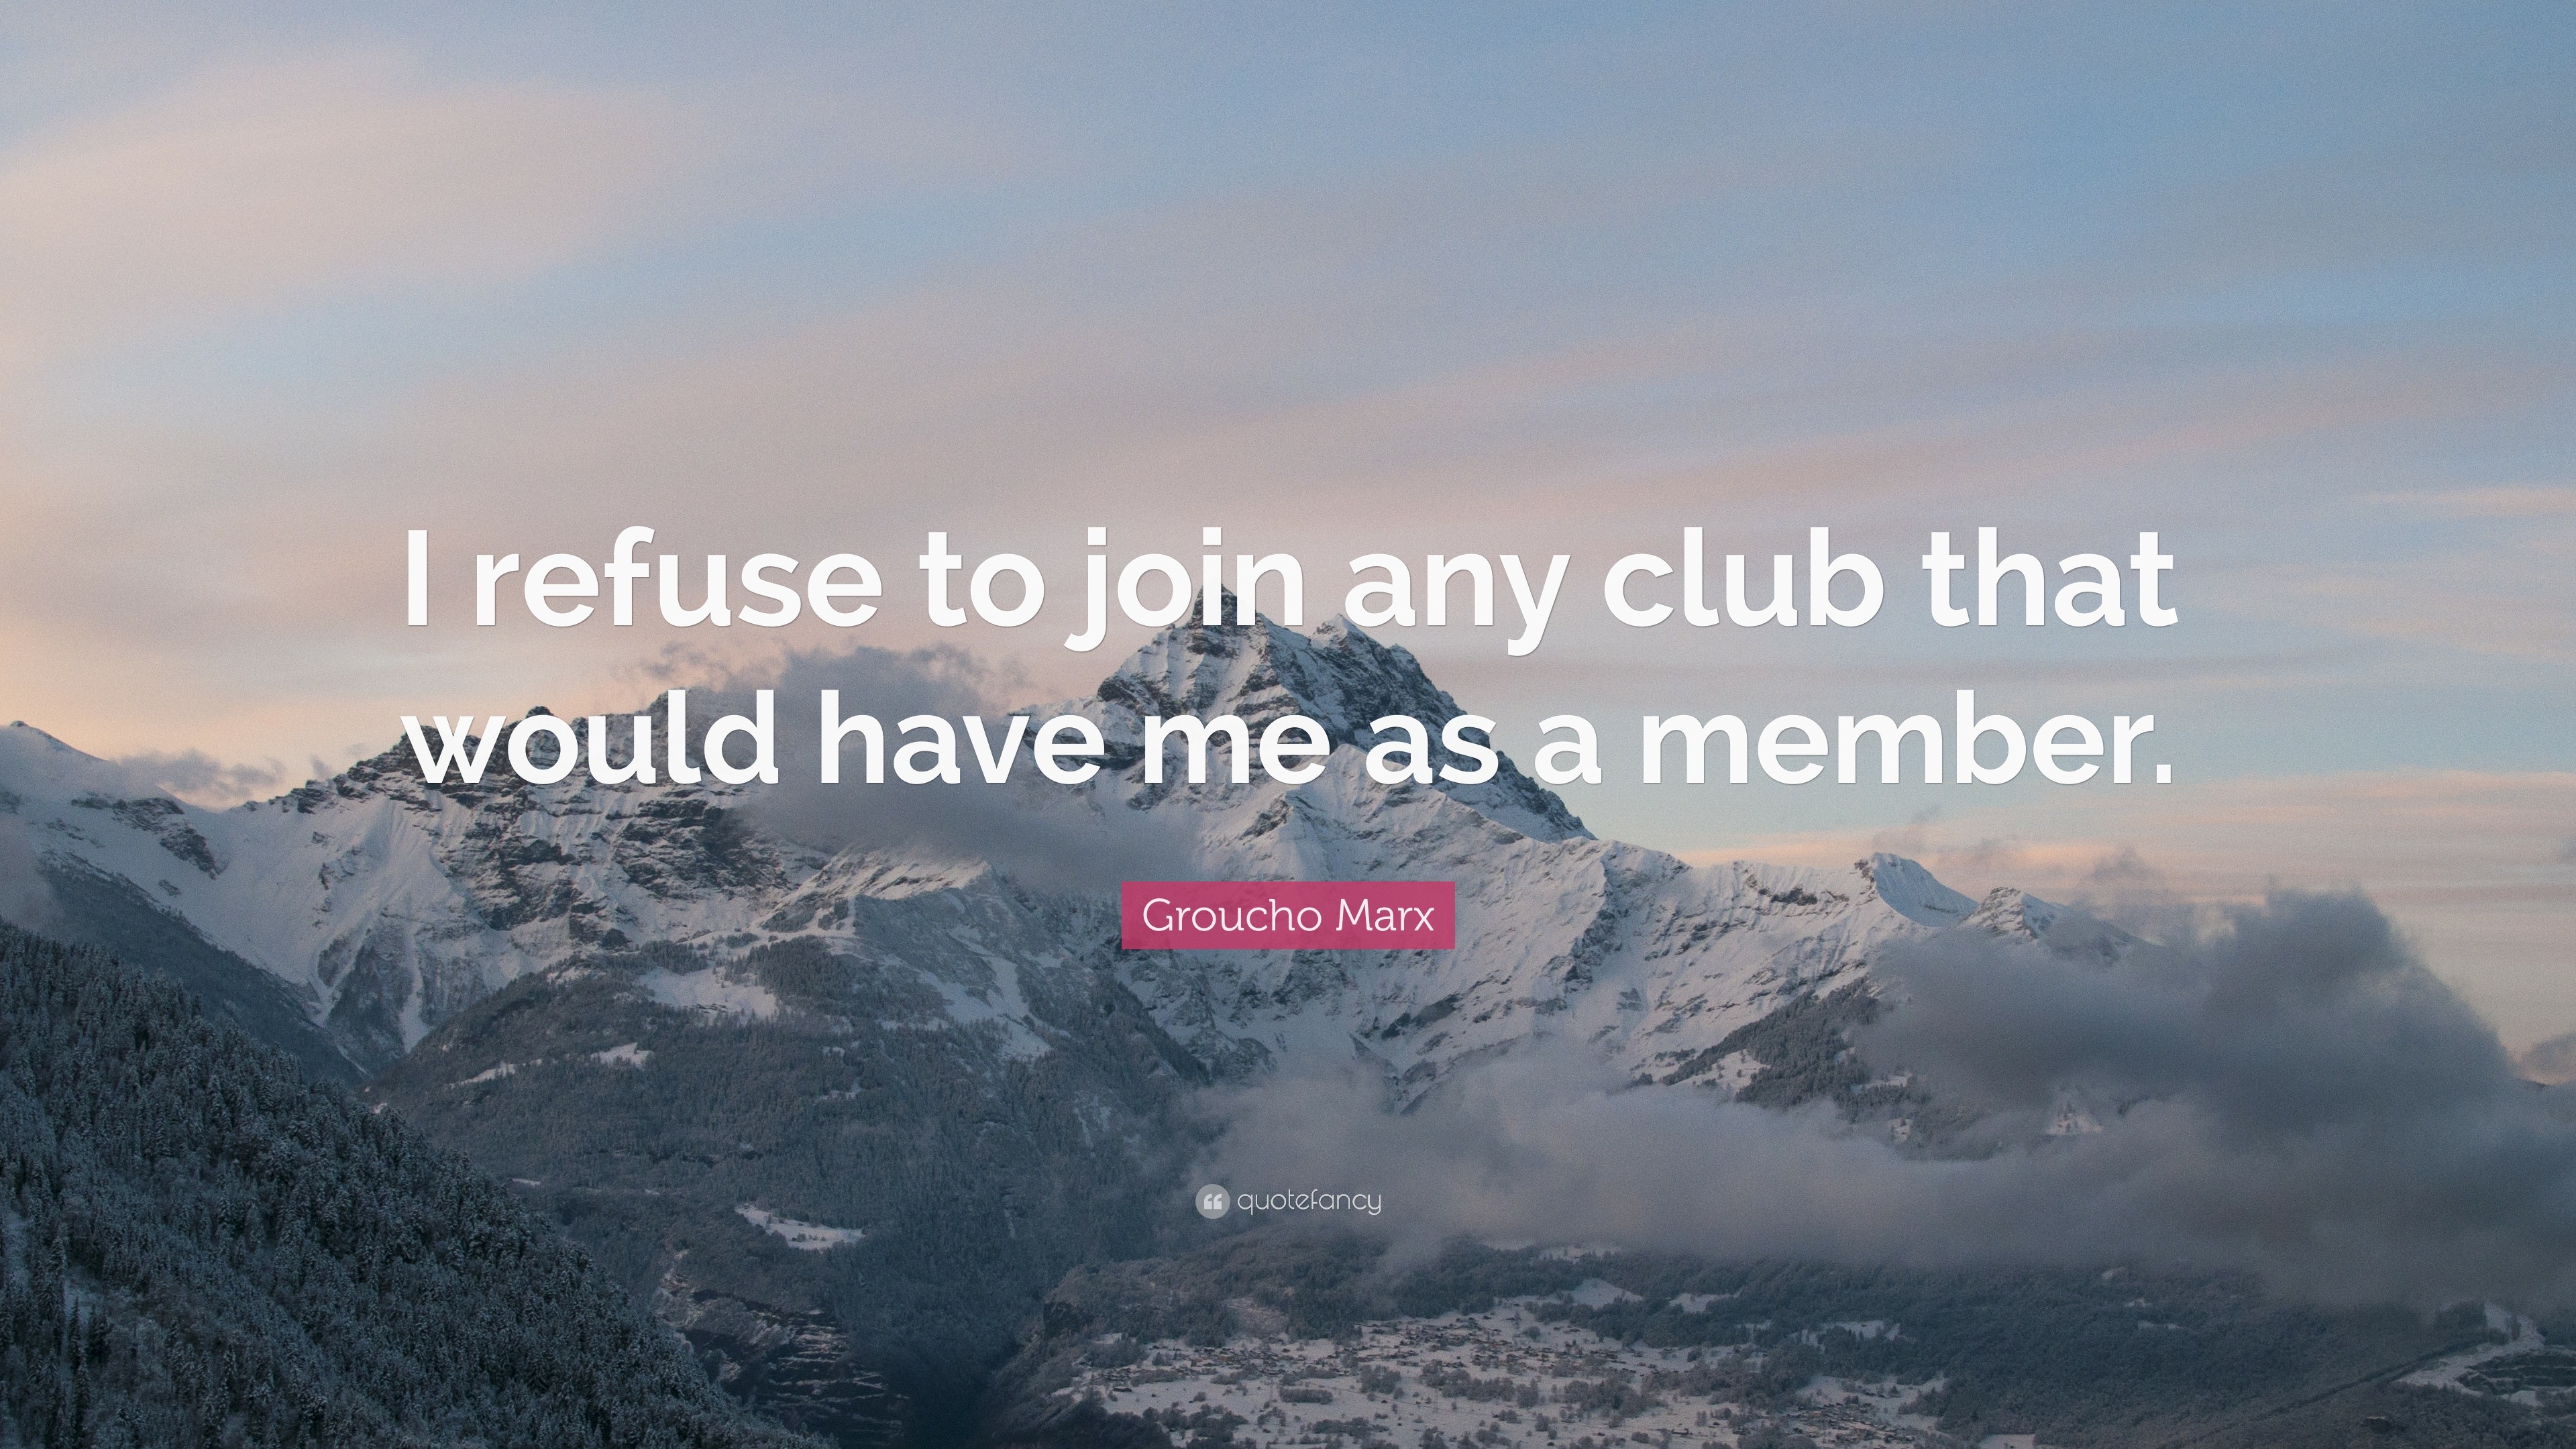 Groucho Marx Quote: “I refuse to join any club that would have me as a ...